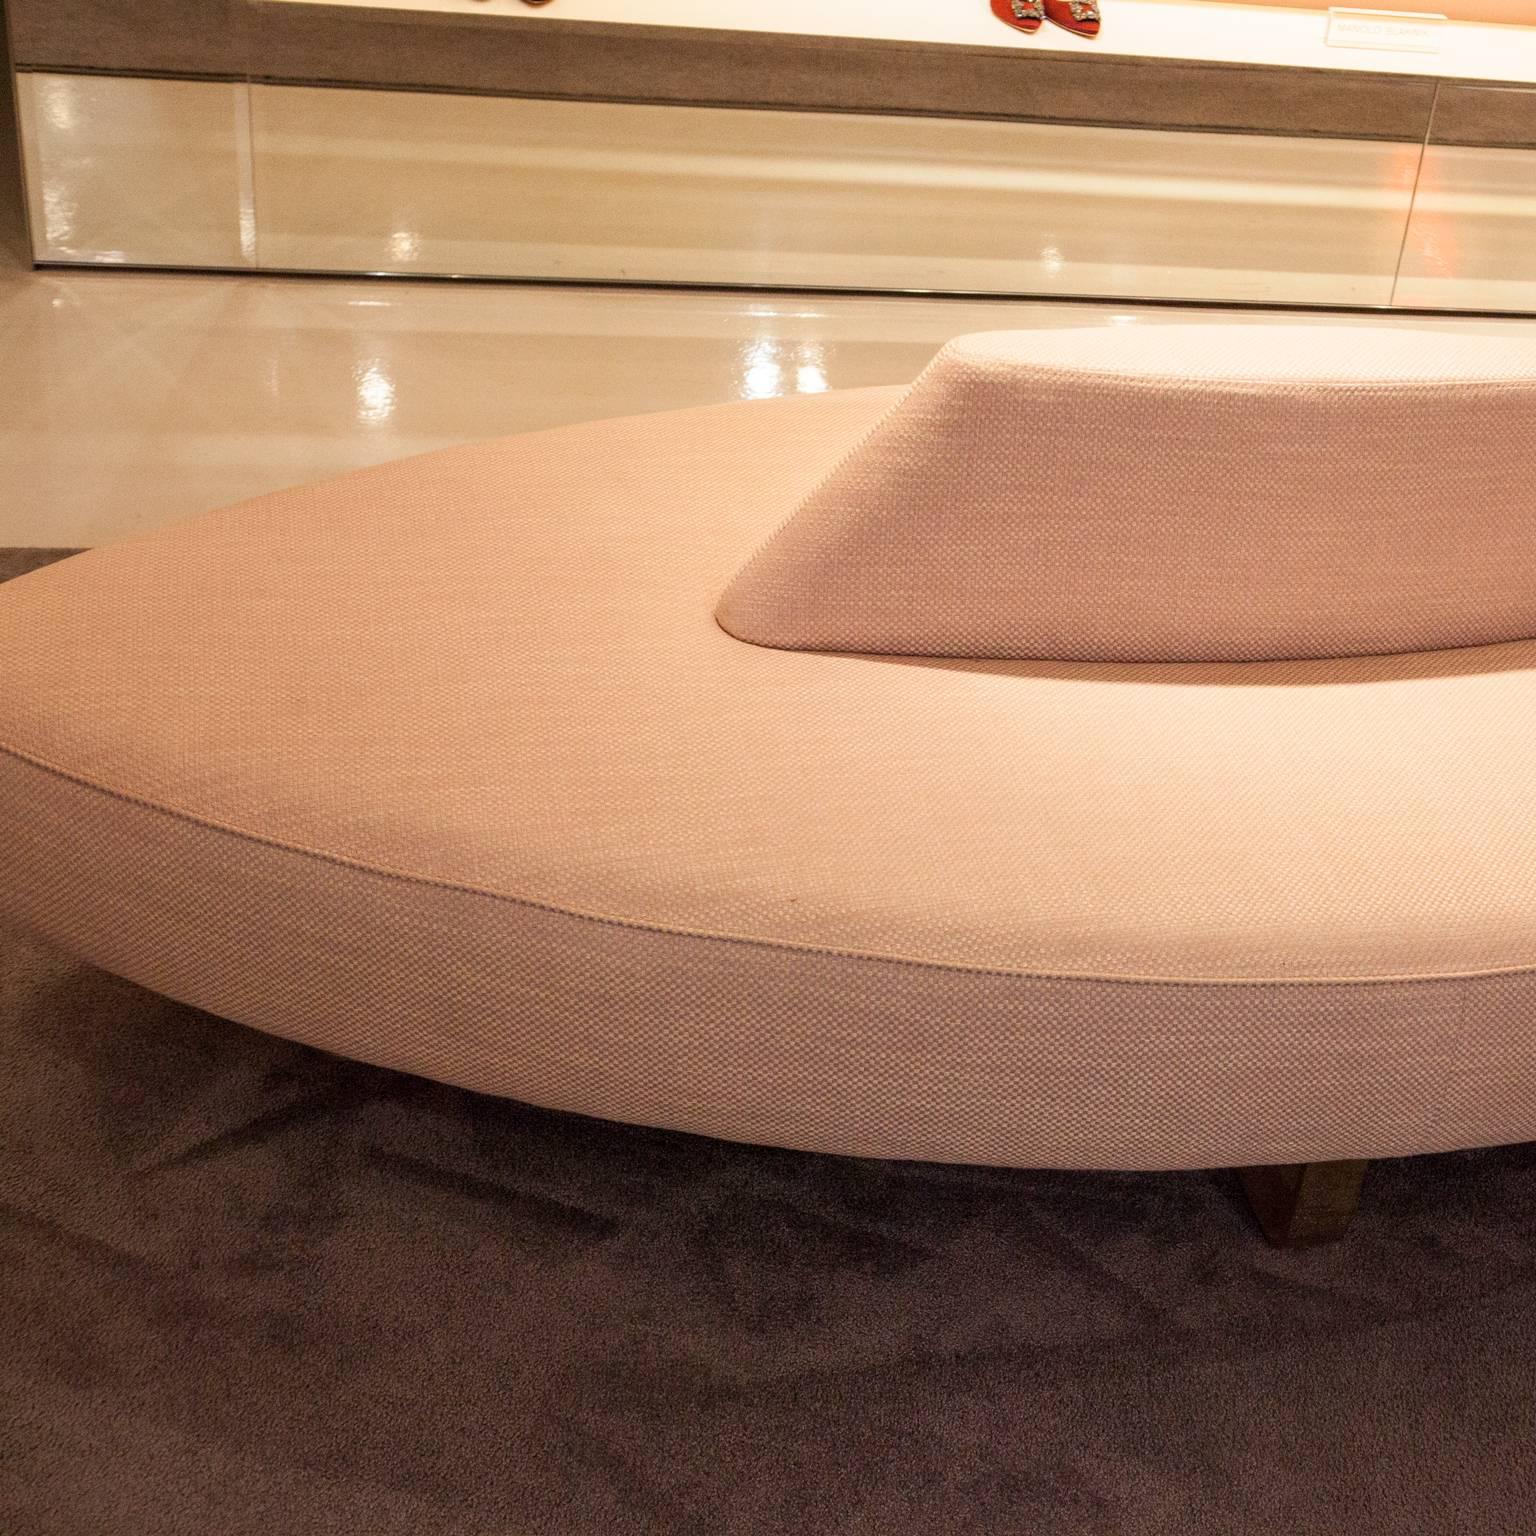 A crush on blush: Not only its dimensions, but also the extraordinary shape and soft color make this piece a true eyecatcher. The seating island, with its cover being made of beautiful rose-colored coarse linen by Dominique Kieffer, works perfectly